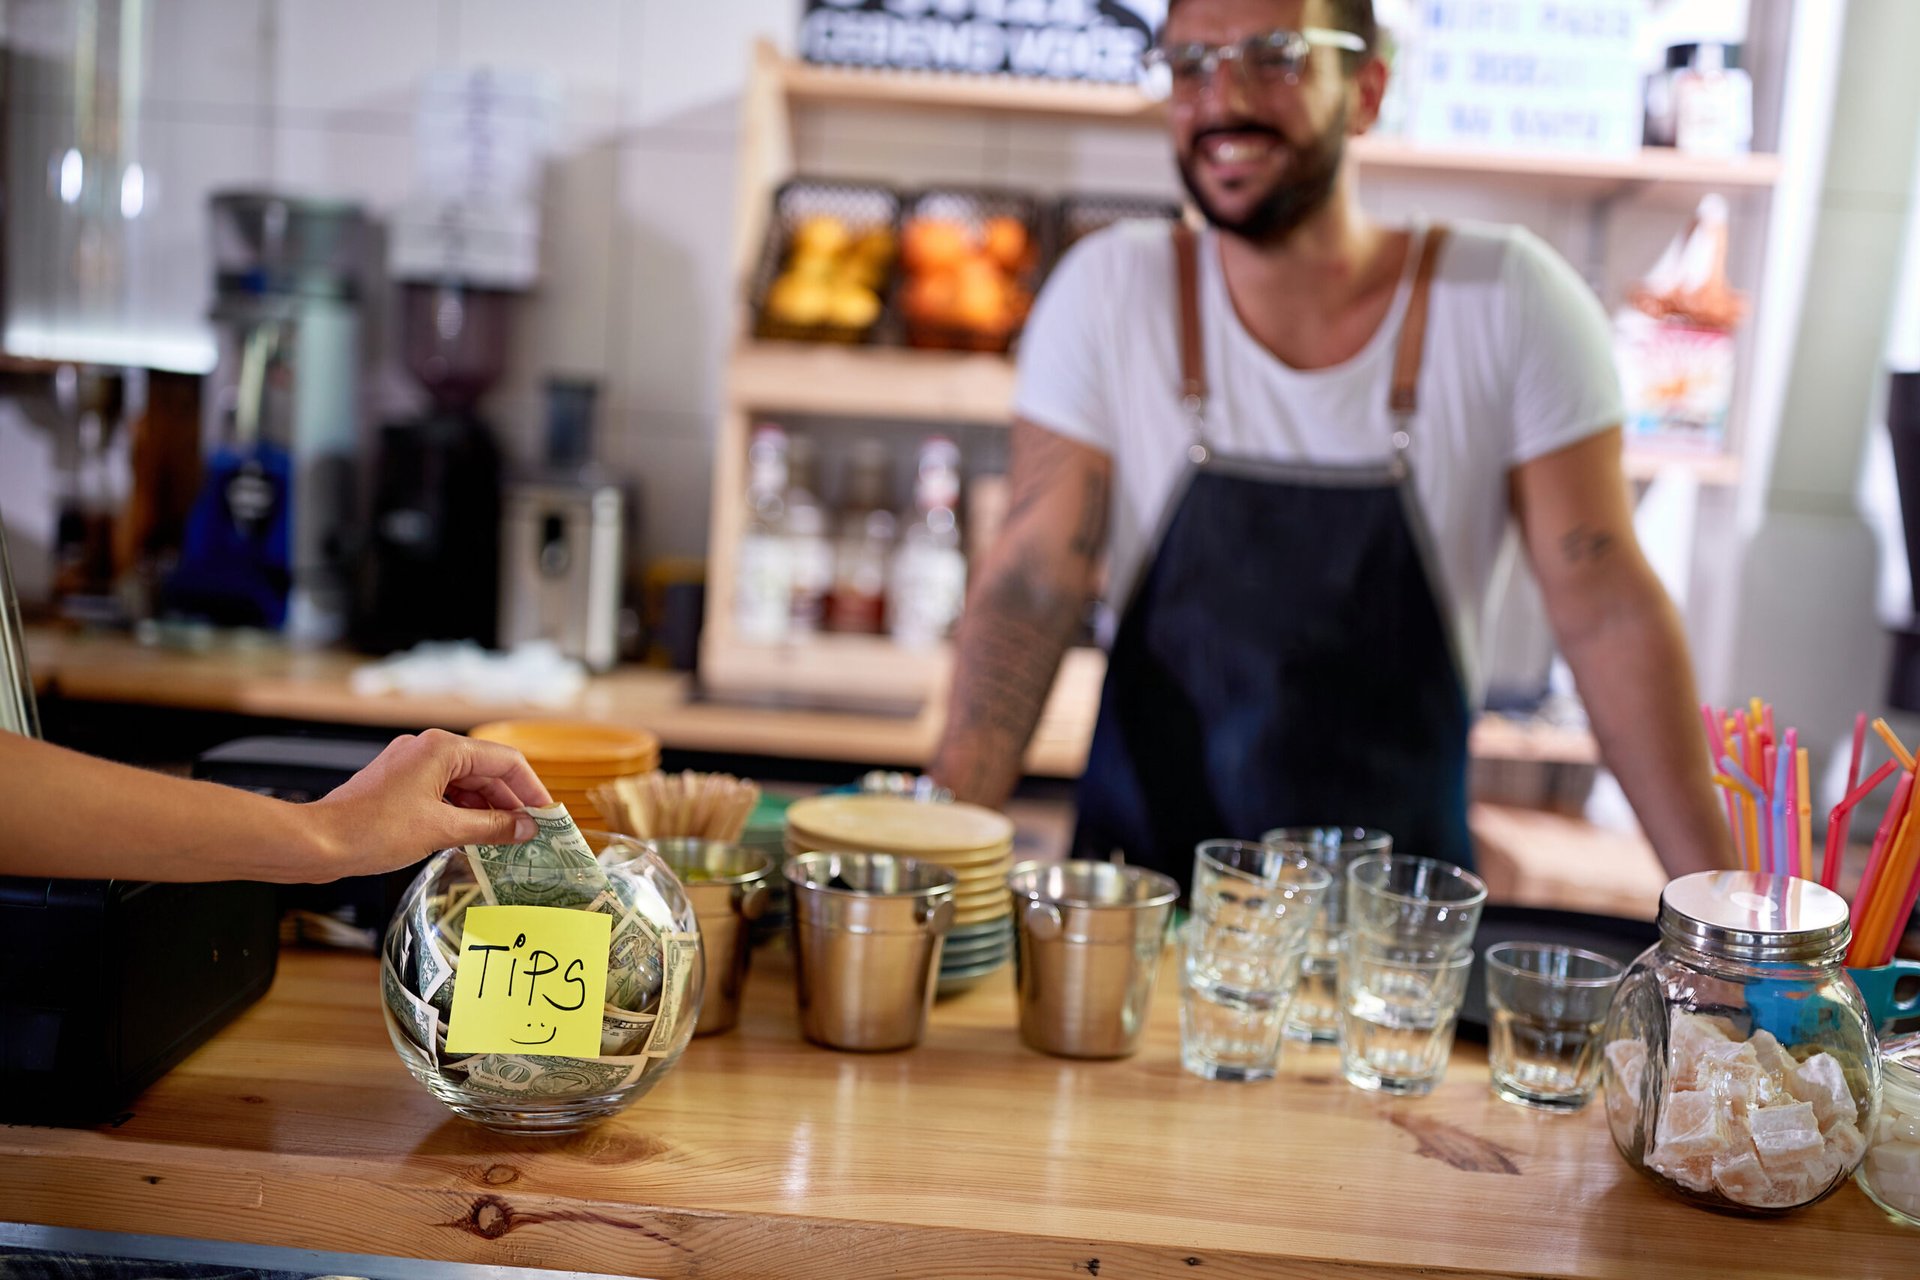 Smiling employee watching money go in the tip jar at the coffee shop